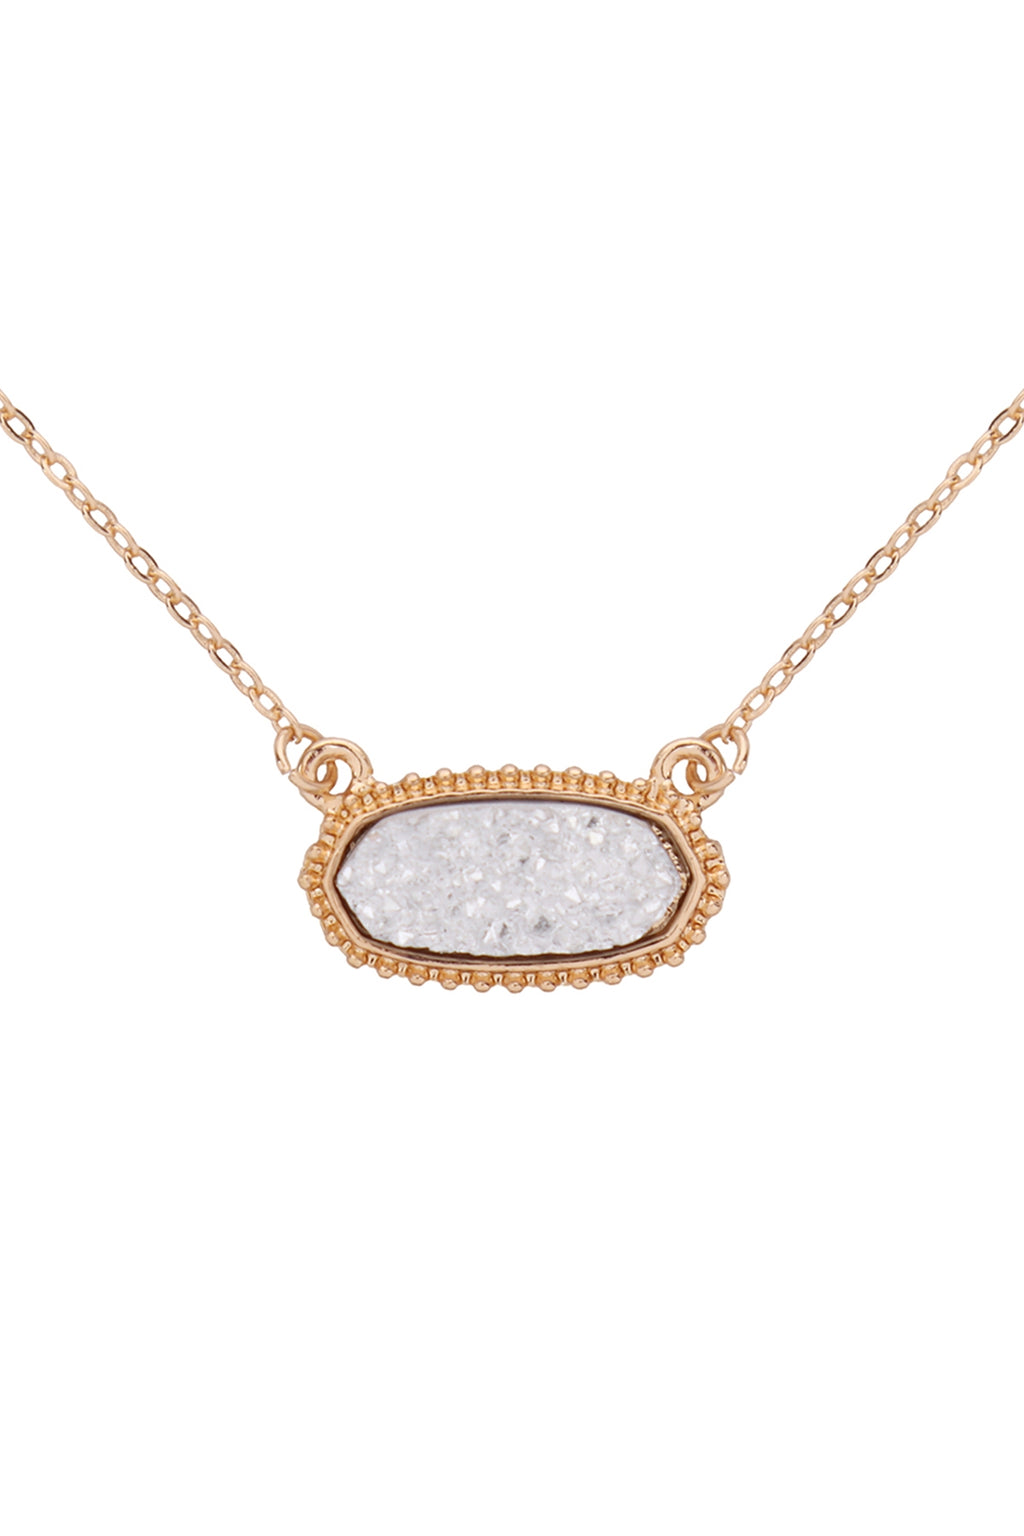 Gold Silver Druzy Oval Stone Pendant Necklace and Earring Set - Pack of 6